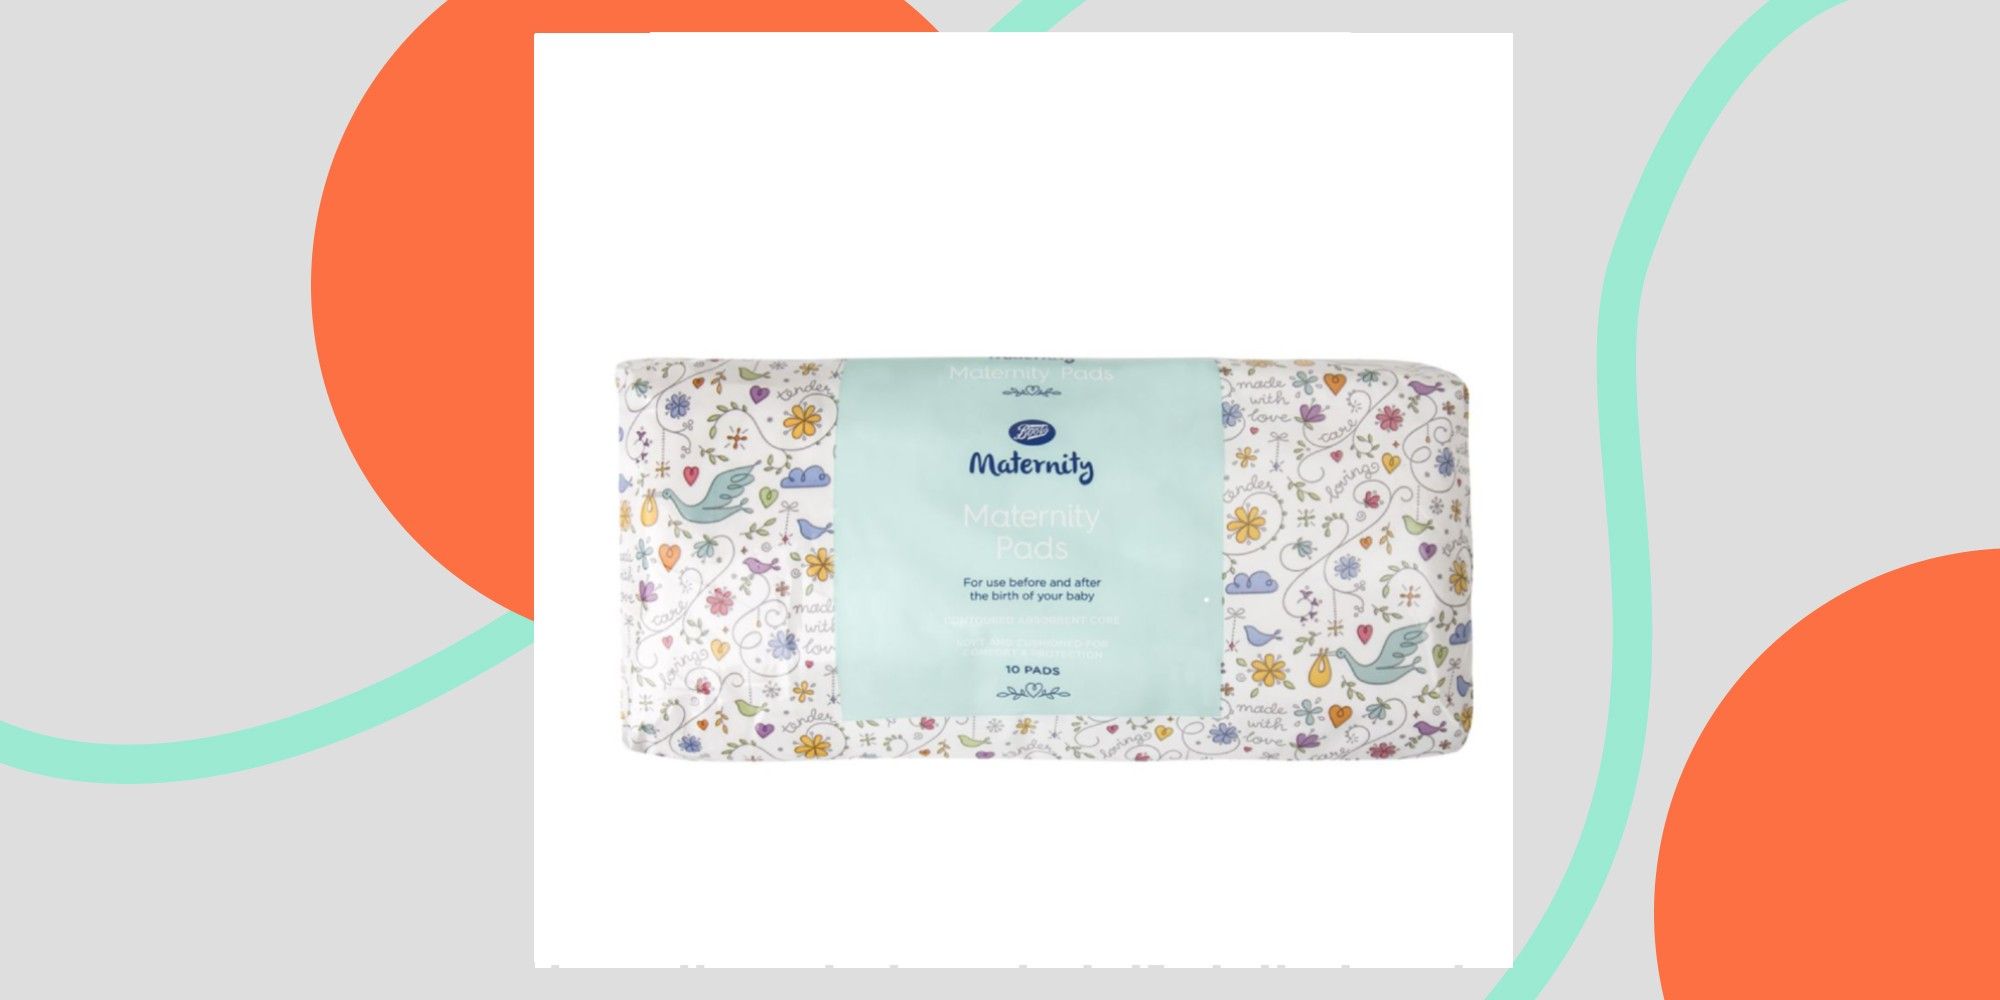 10 Best Maternity Pads to Buy For Pregnant and New Mums